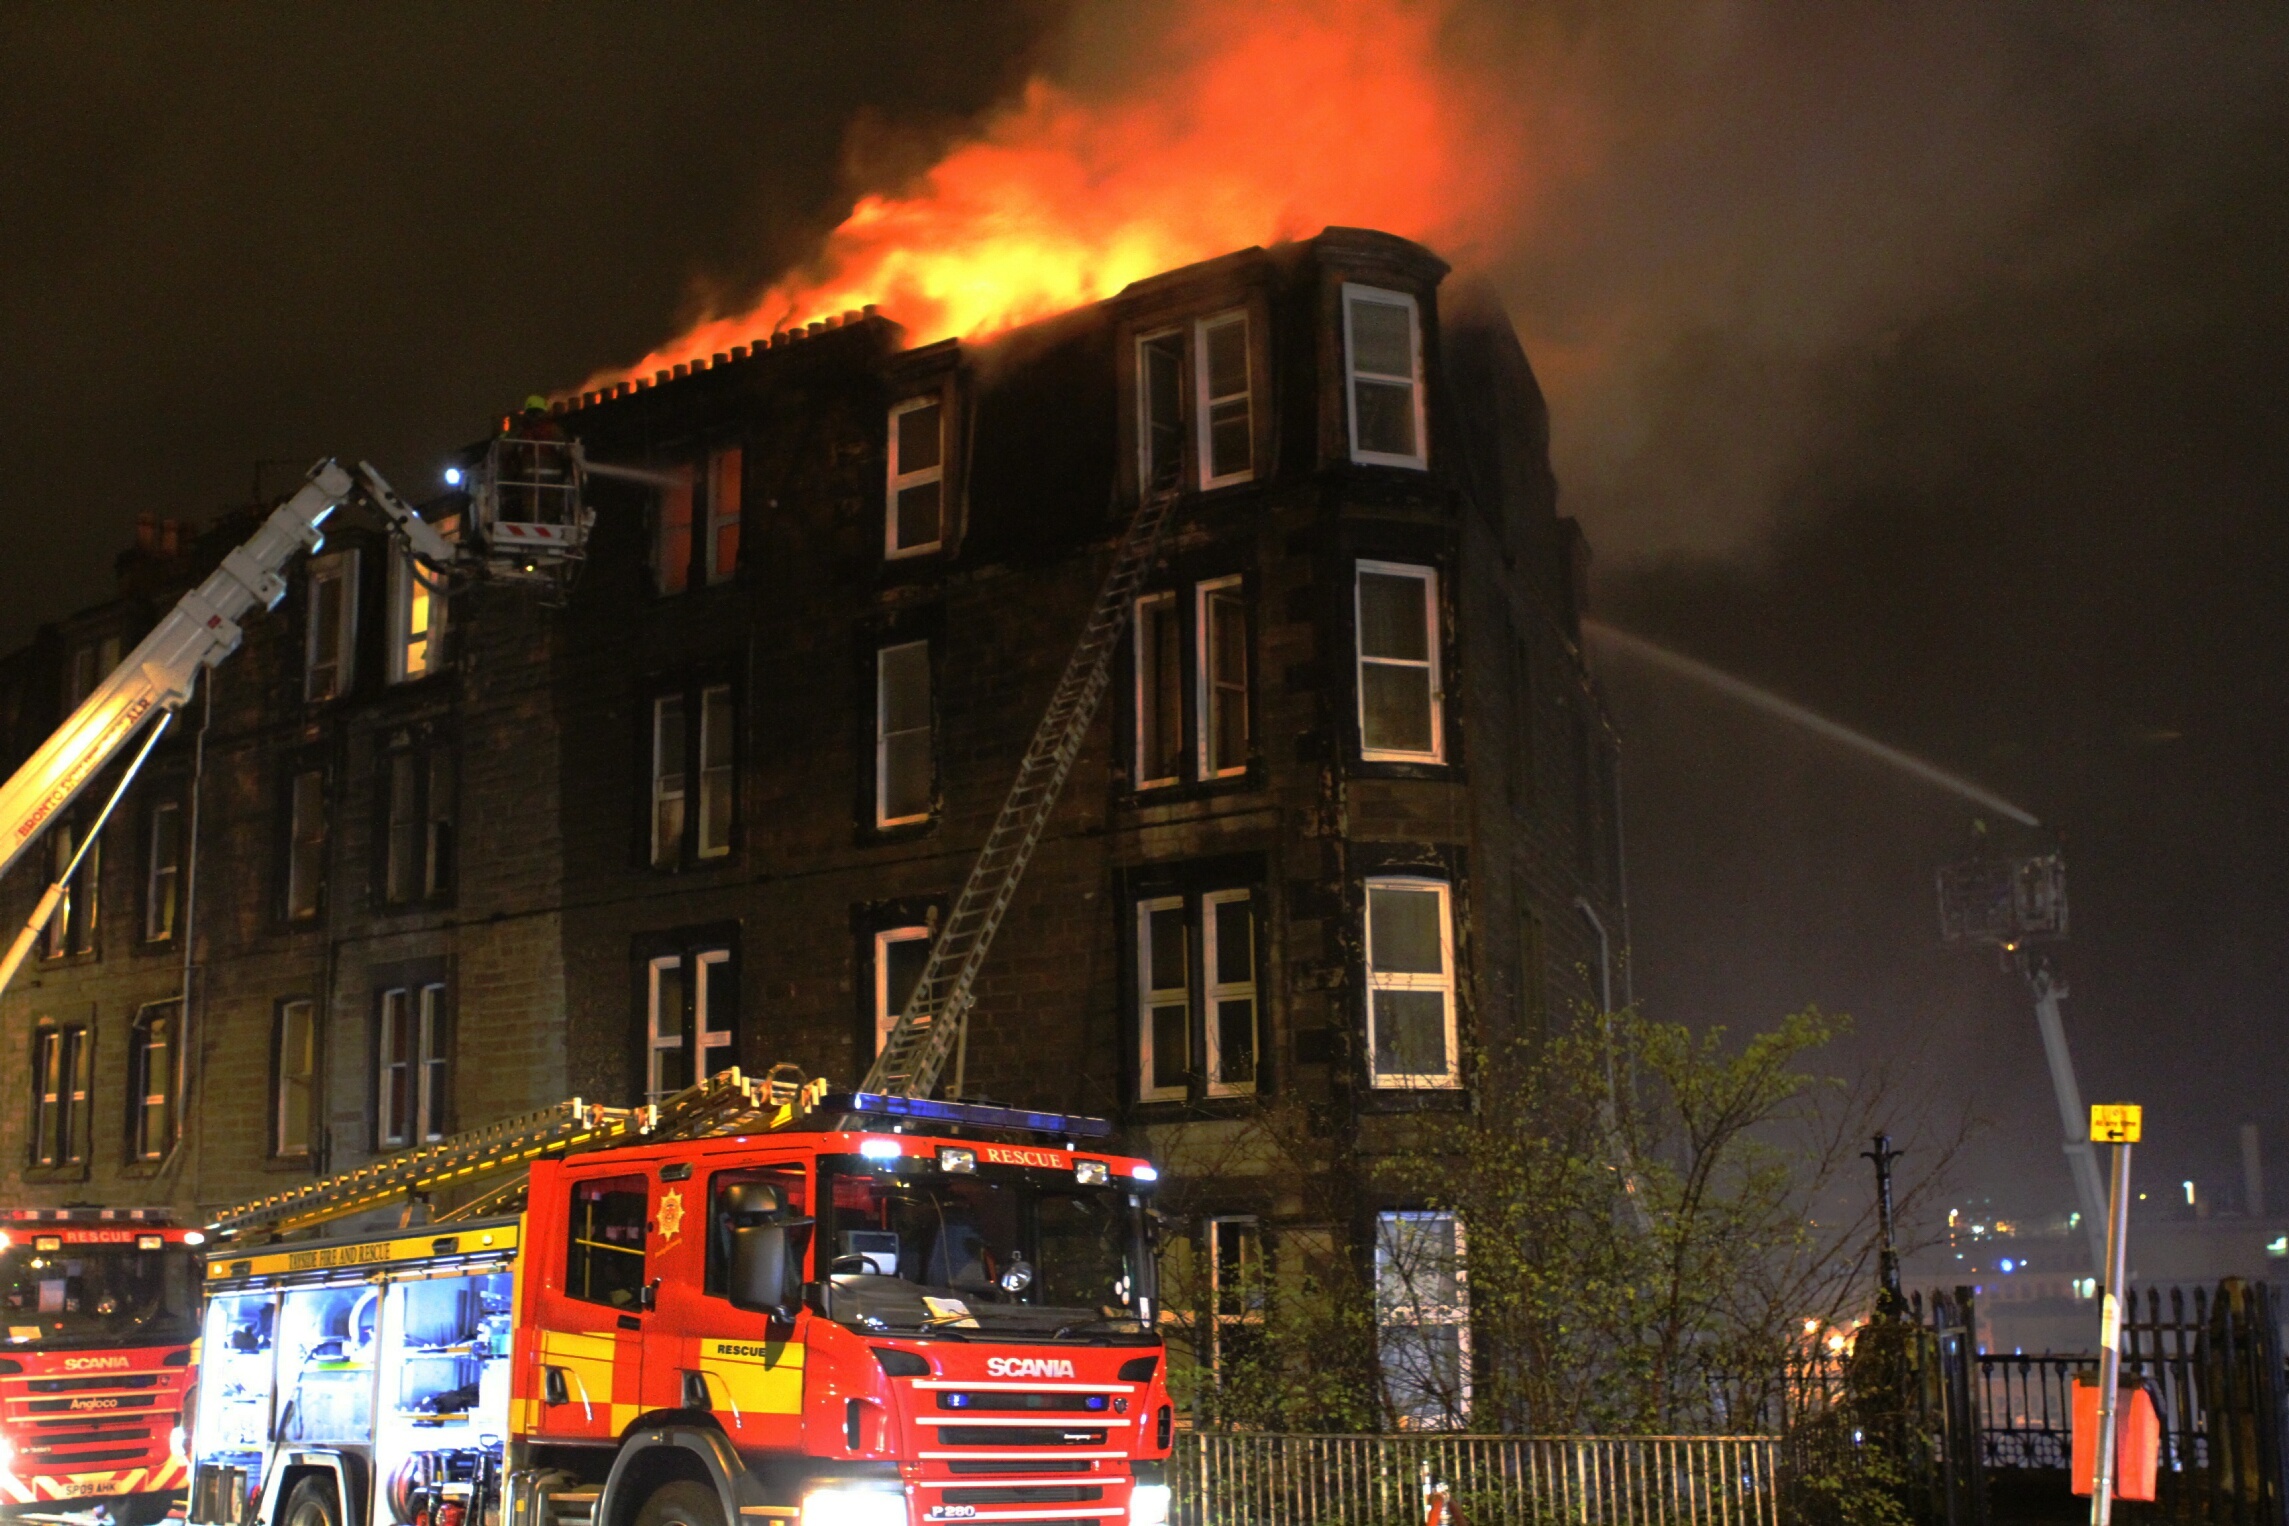 The scene of the fire in a tenement block at Garland Place, Dundee.